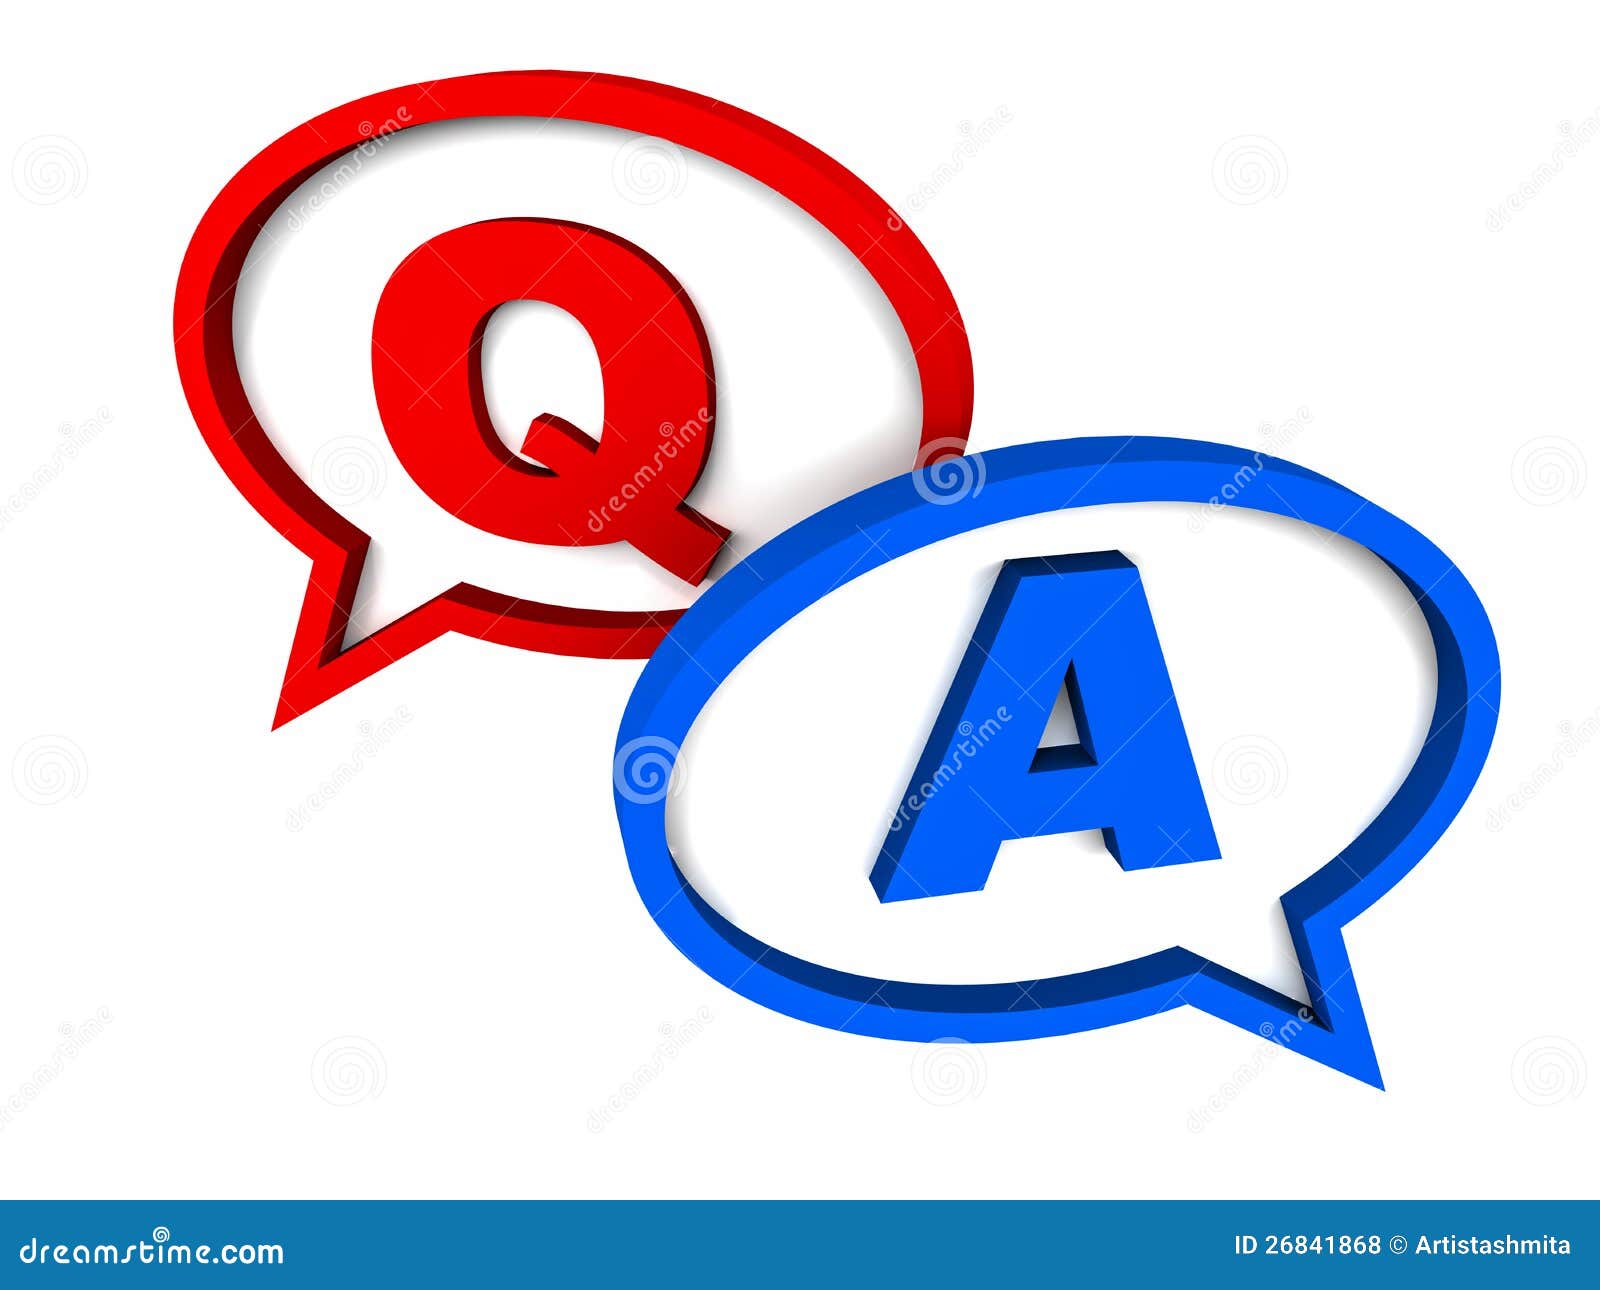 questions and answers clipart - photo #26